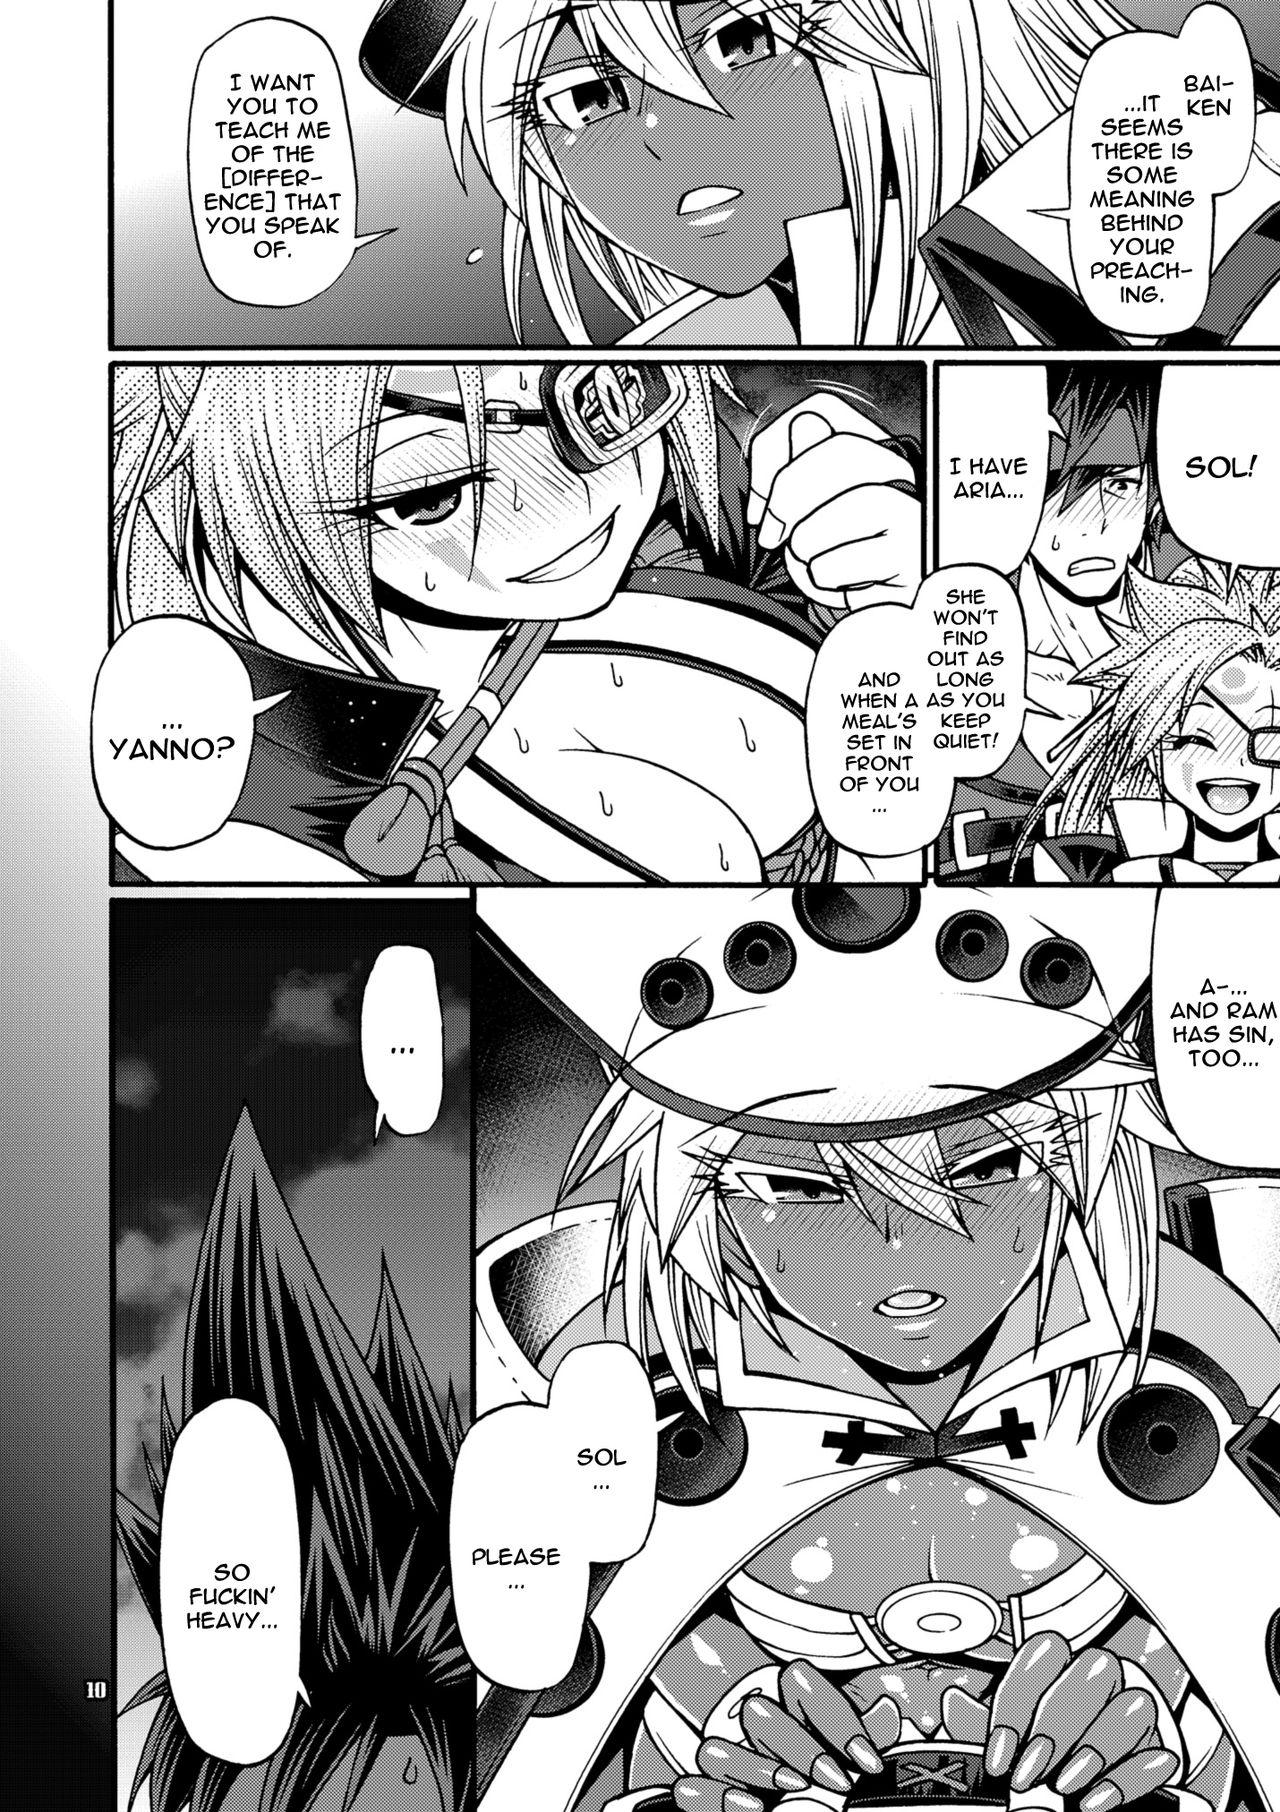 Doublepenetration Do What You Wanna Do - Guilty gear Rough Sex - Page 9